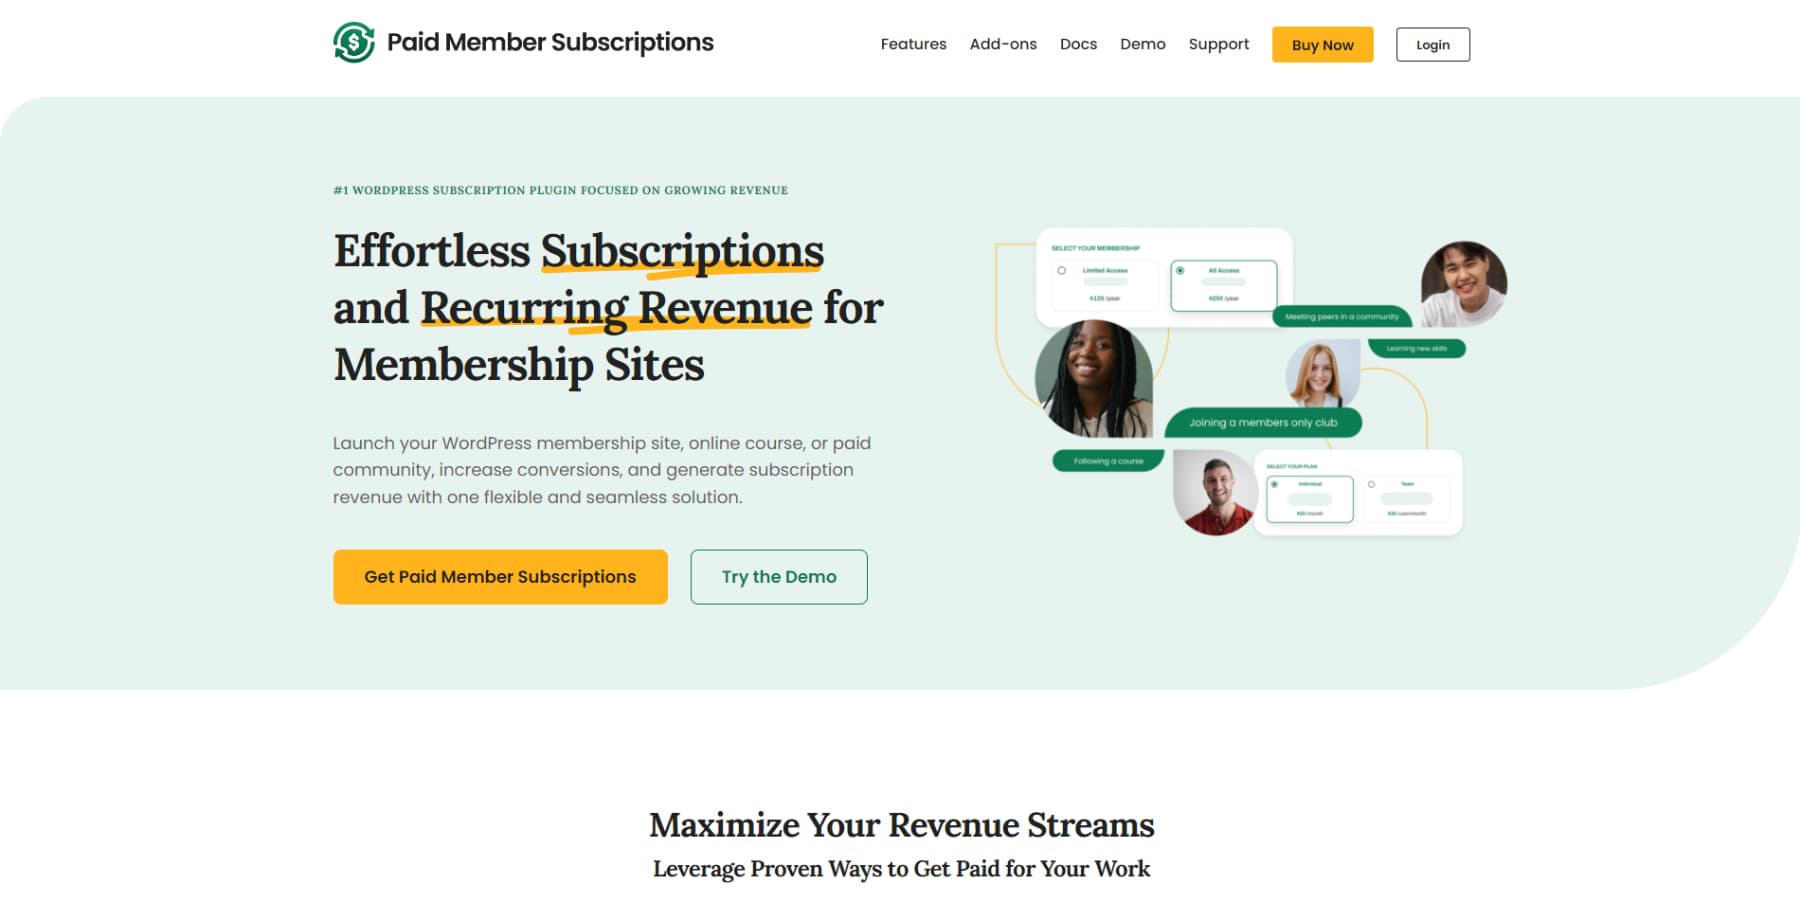 A screenshot of Paid Member Subscriptions' homepage